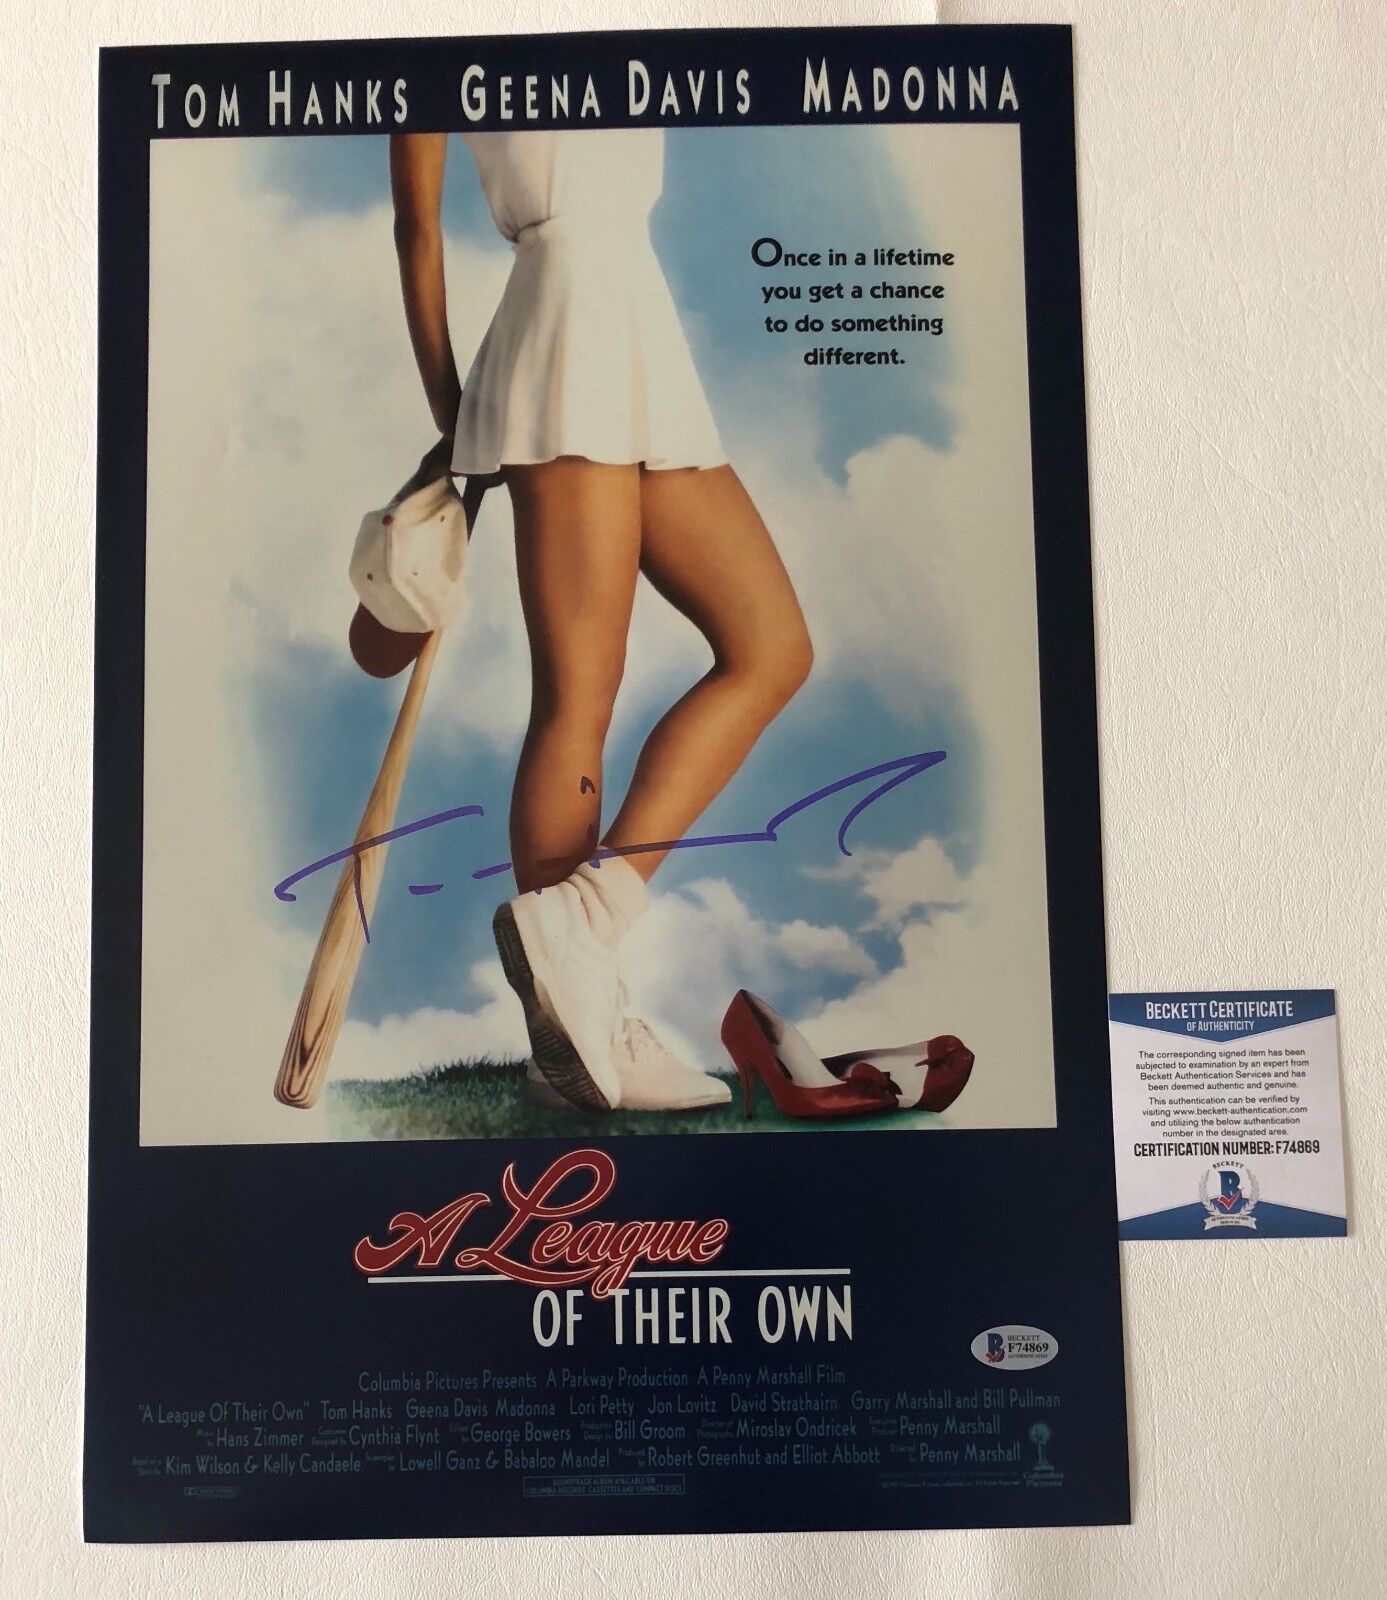 \'A LEAGUE OF THEIR OWN\' TOM HANKS SIGNED 12X18 PHOTO AUTHENTIC AUTOGRAPH BECKETT